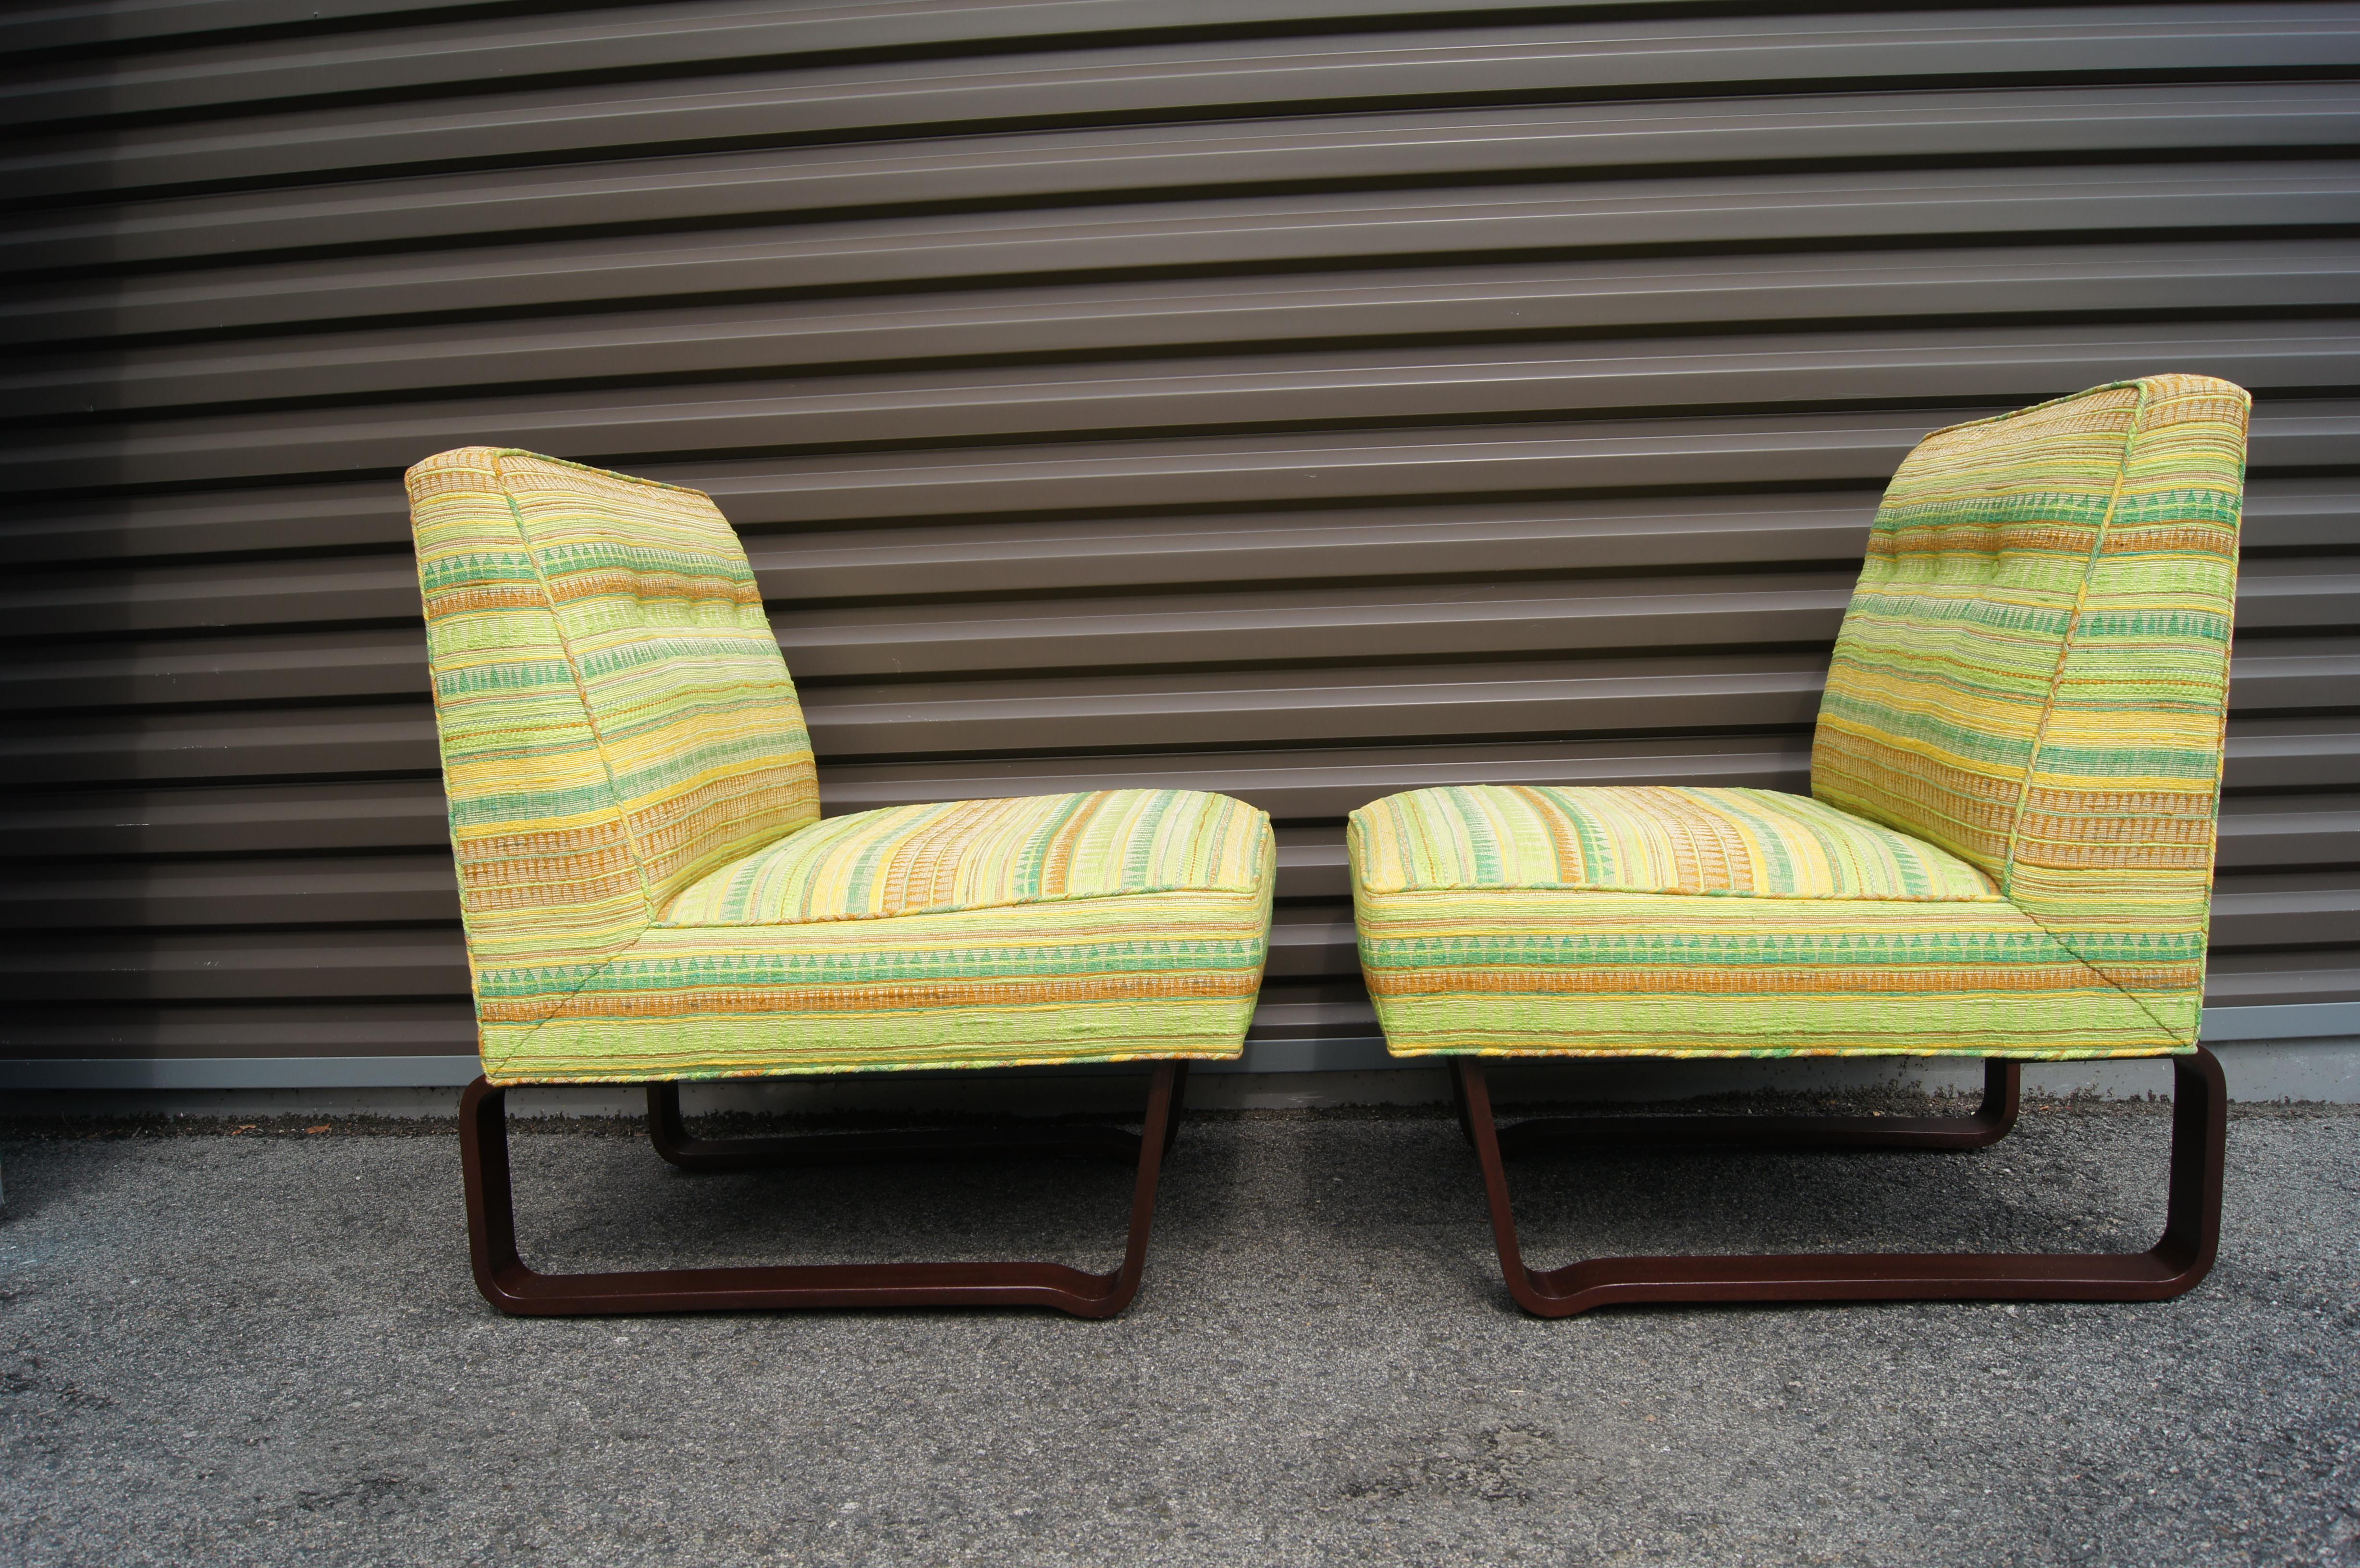 These slipper chairs were designed by Edward Wormley and produced by Dunbar in 1949. The sled-style mahogany legs support a comfortable wide seat with an inclined back. The pair are upholstered in their original textile, a weave of greens, oranges,